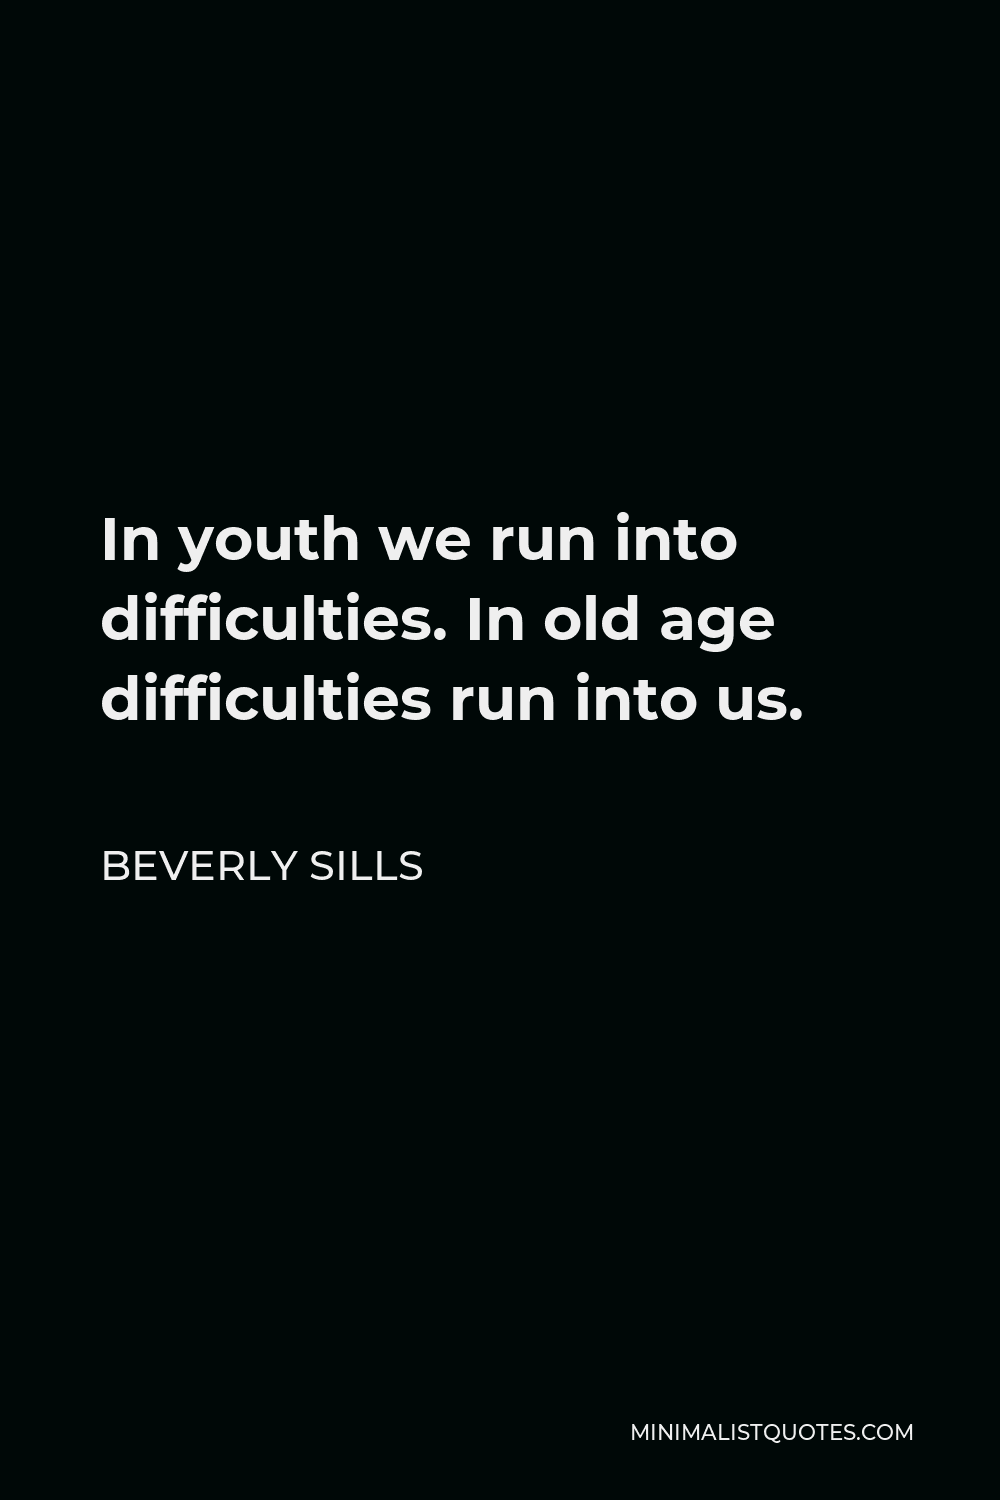 Beverly Sills Quote - In youth we run into difficulties. In old age difficulties run into us.